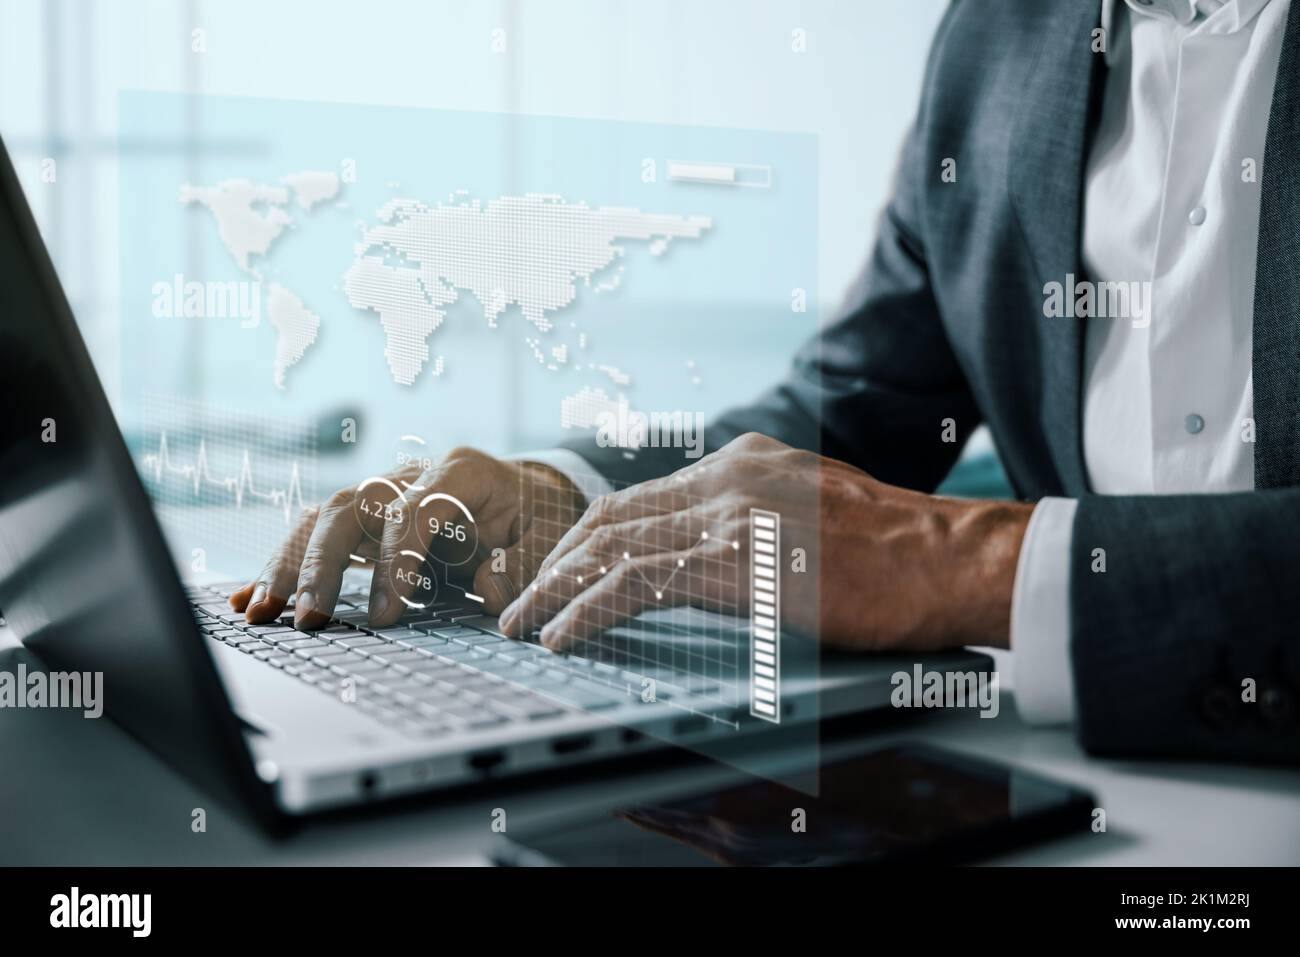 business data analysis on virtual screen. economic growth, stock market, digital marketing, global invest and trading concept. businessman analyzing t Stock Photo